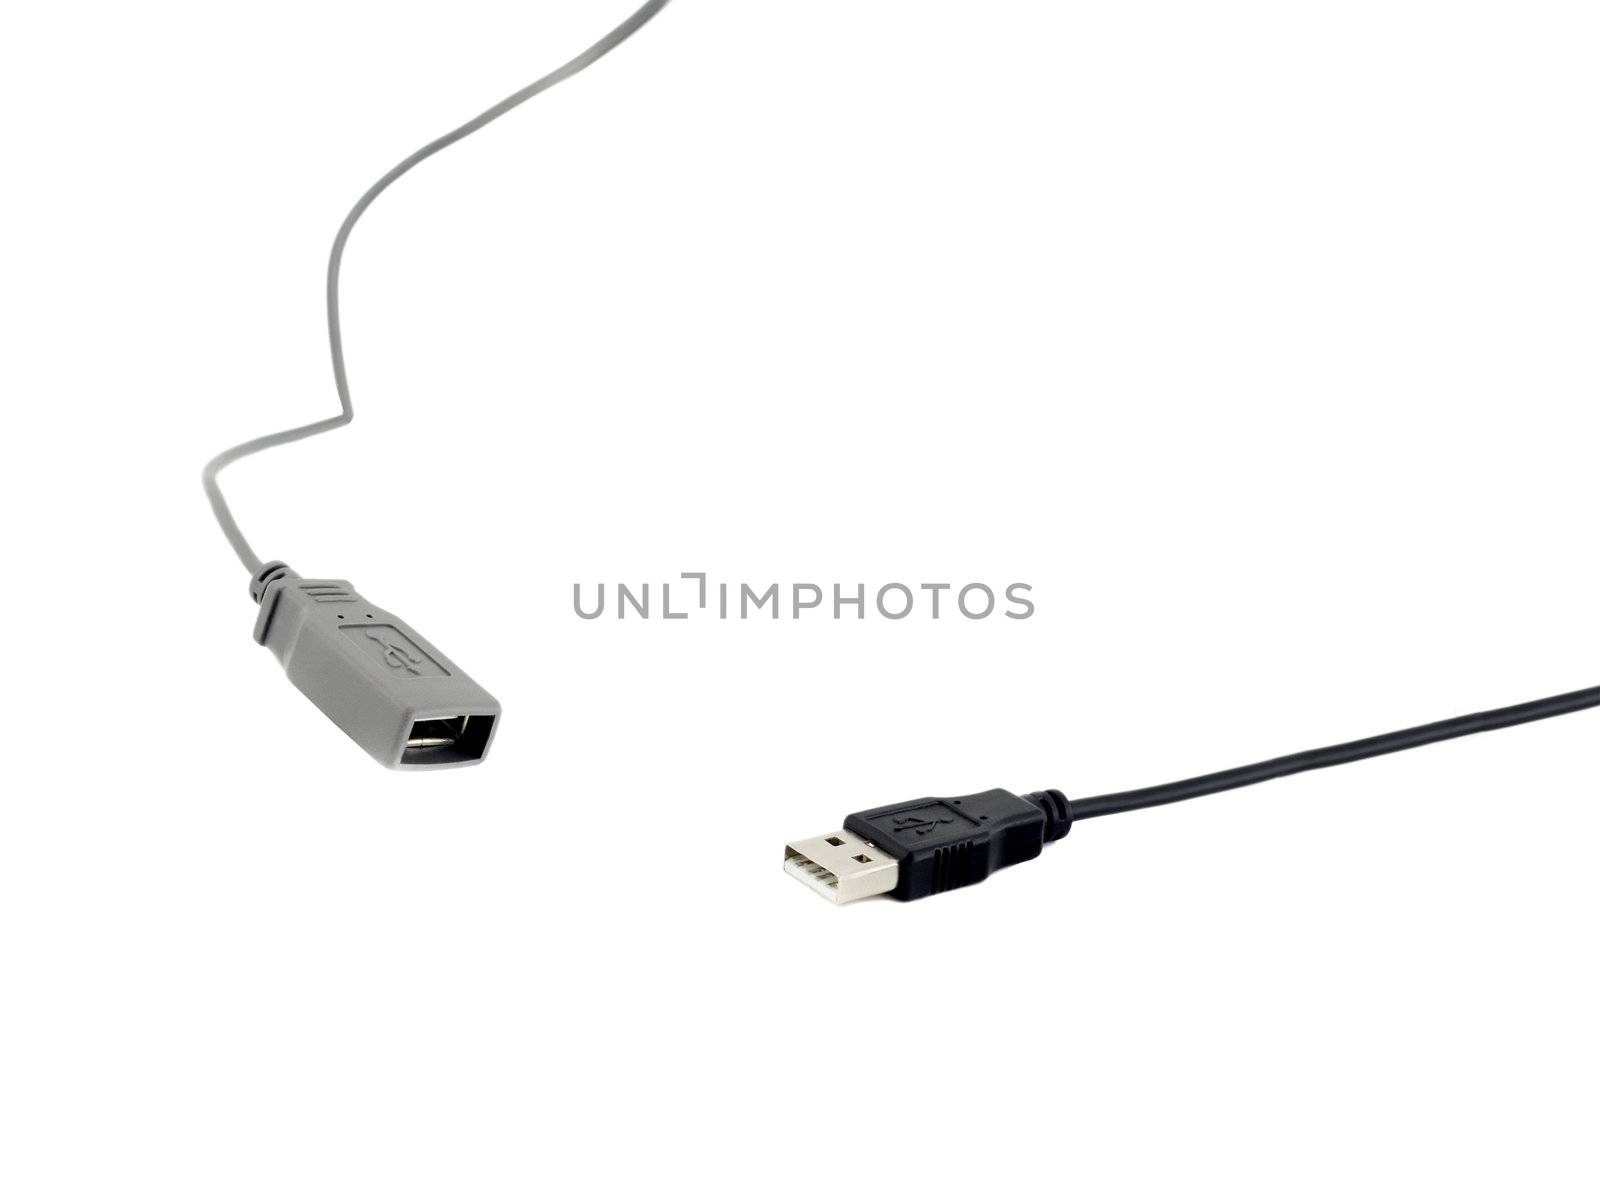 Isolated black and white USB cables on white background.